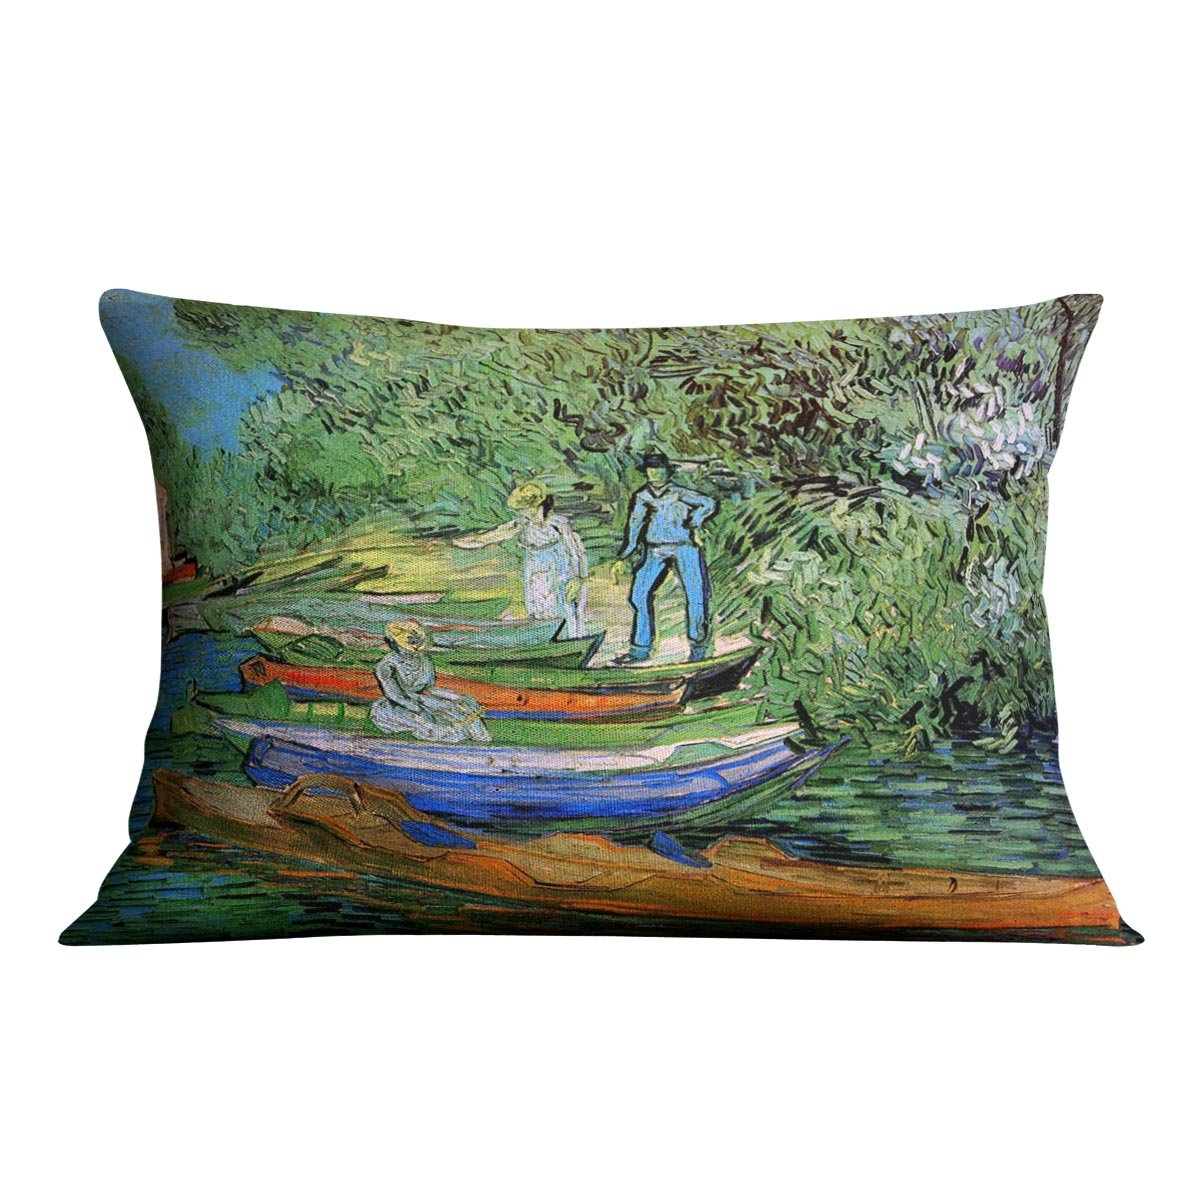 Bank of the Oise at Auvers by Van Gogh Throw Pillow